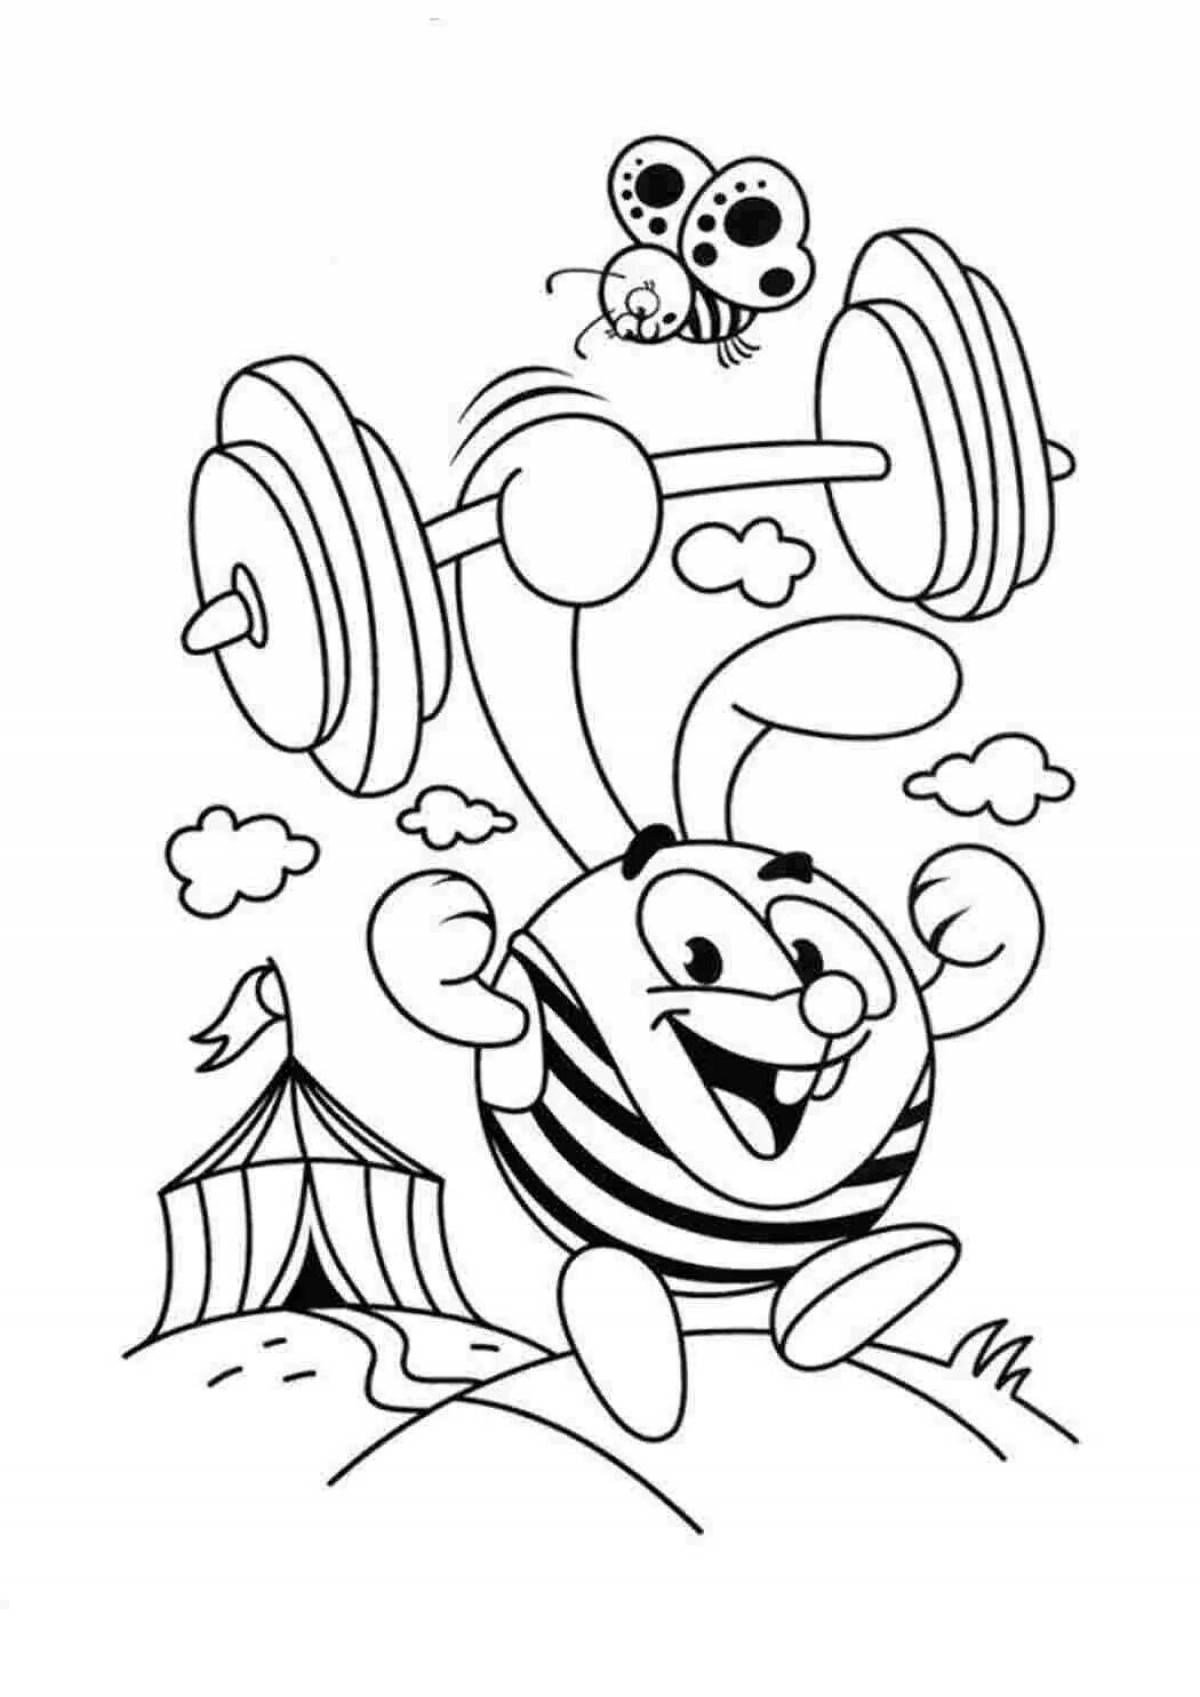 Blissful health coloring page